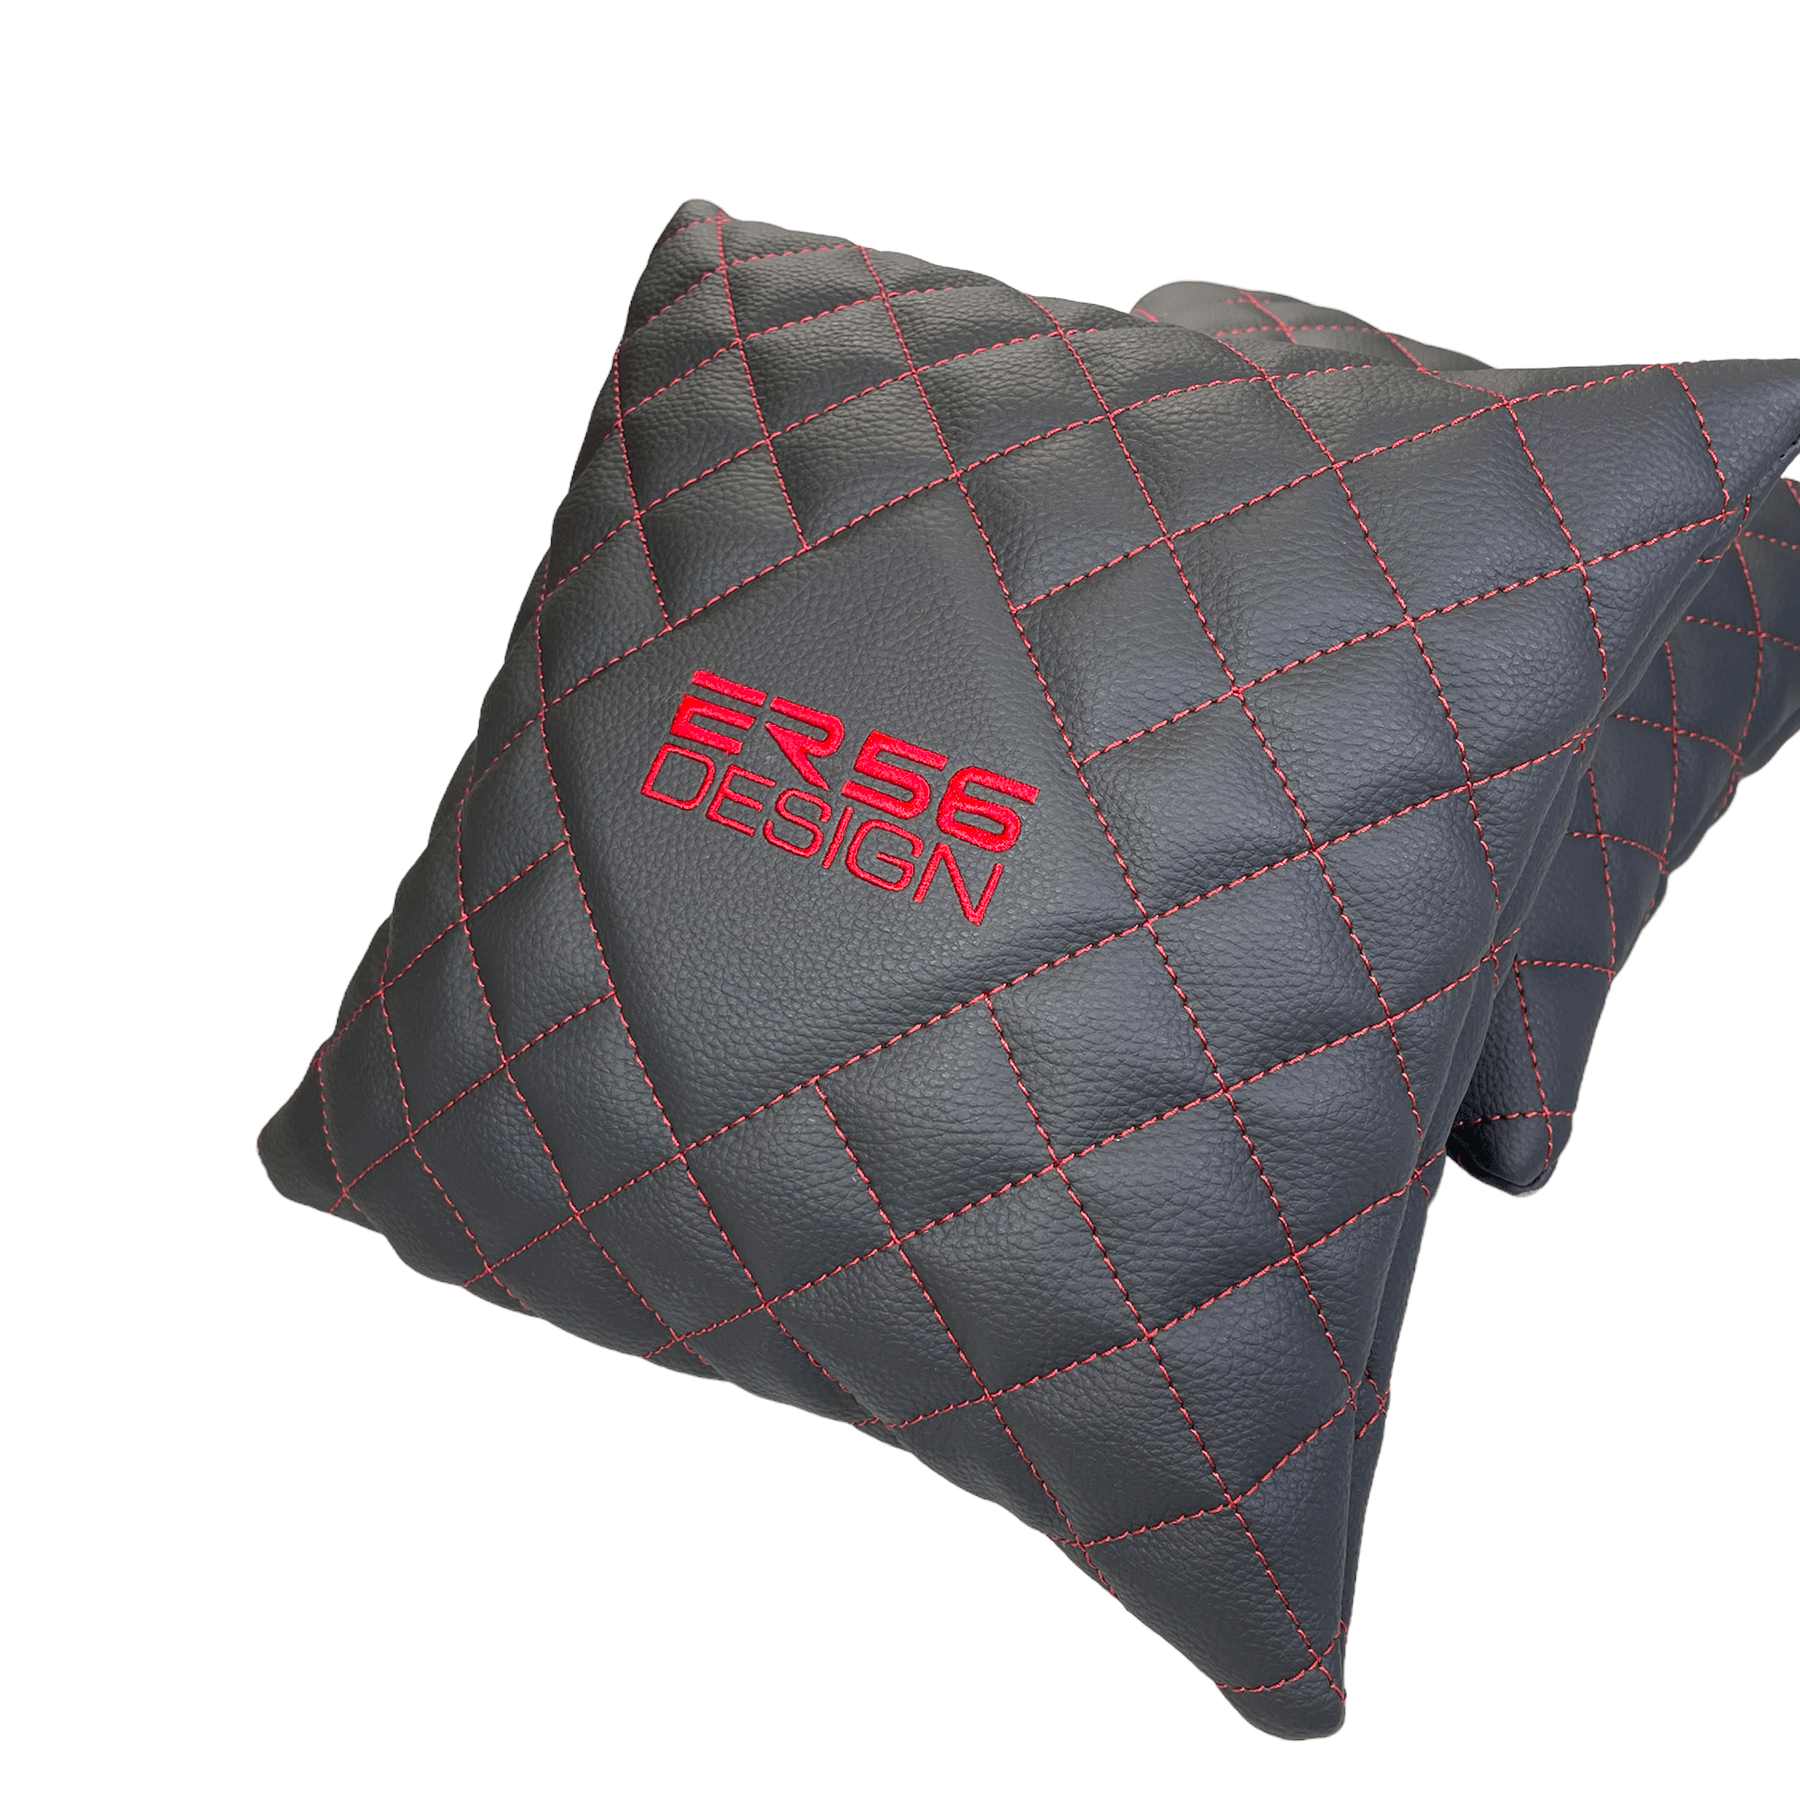 Black Leather Pillows ER56 Design Set of 2 Red Sewing - AutoWin